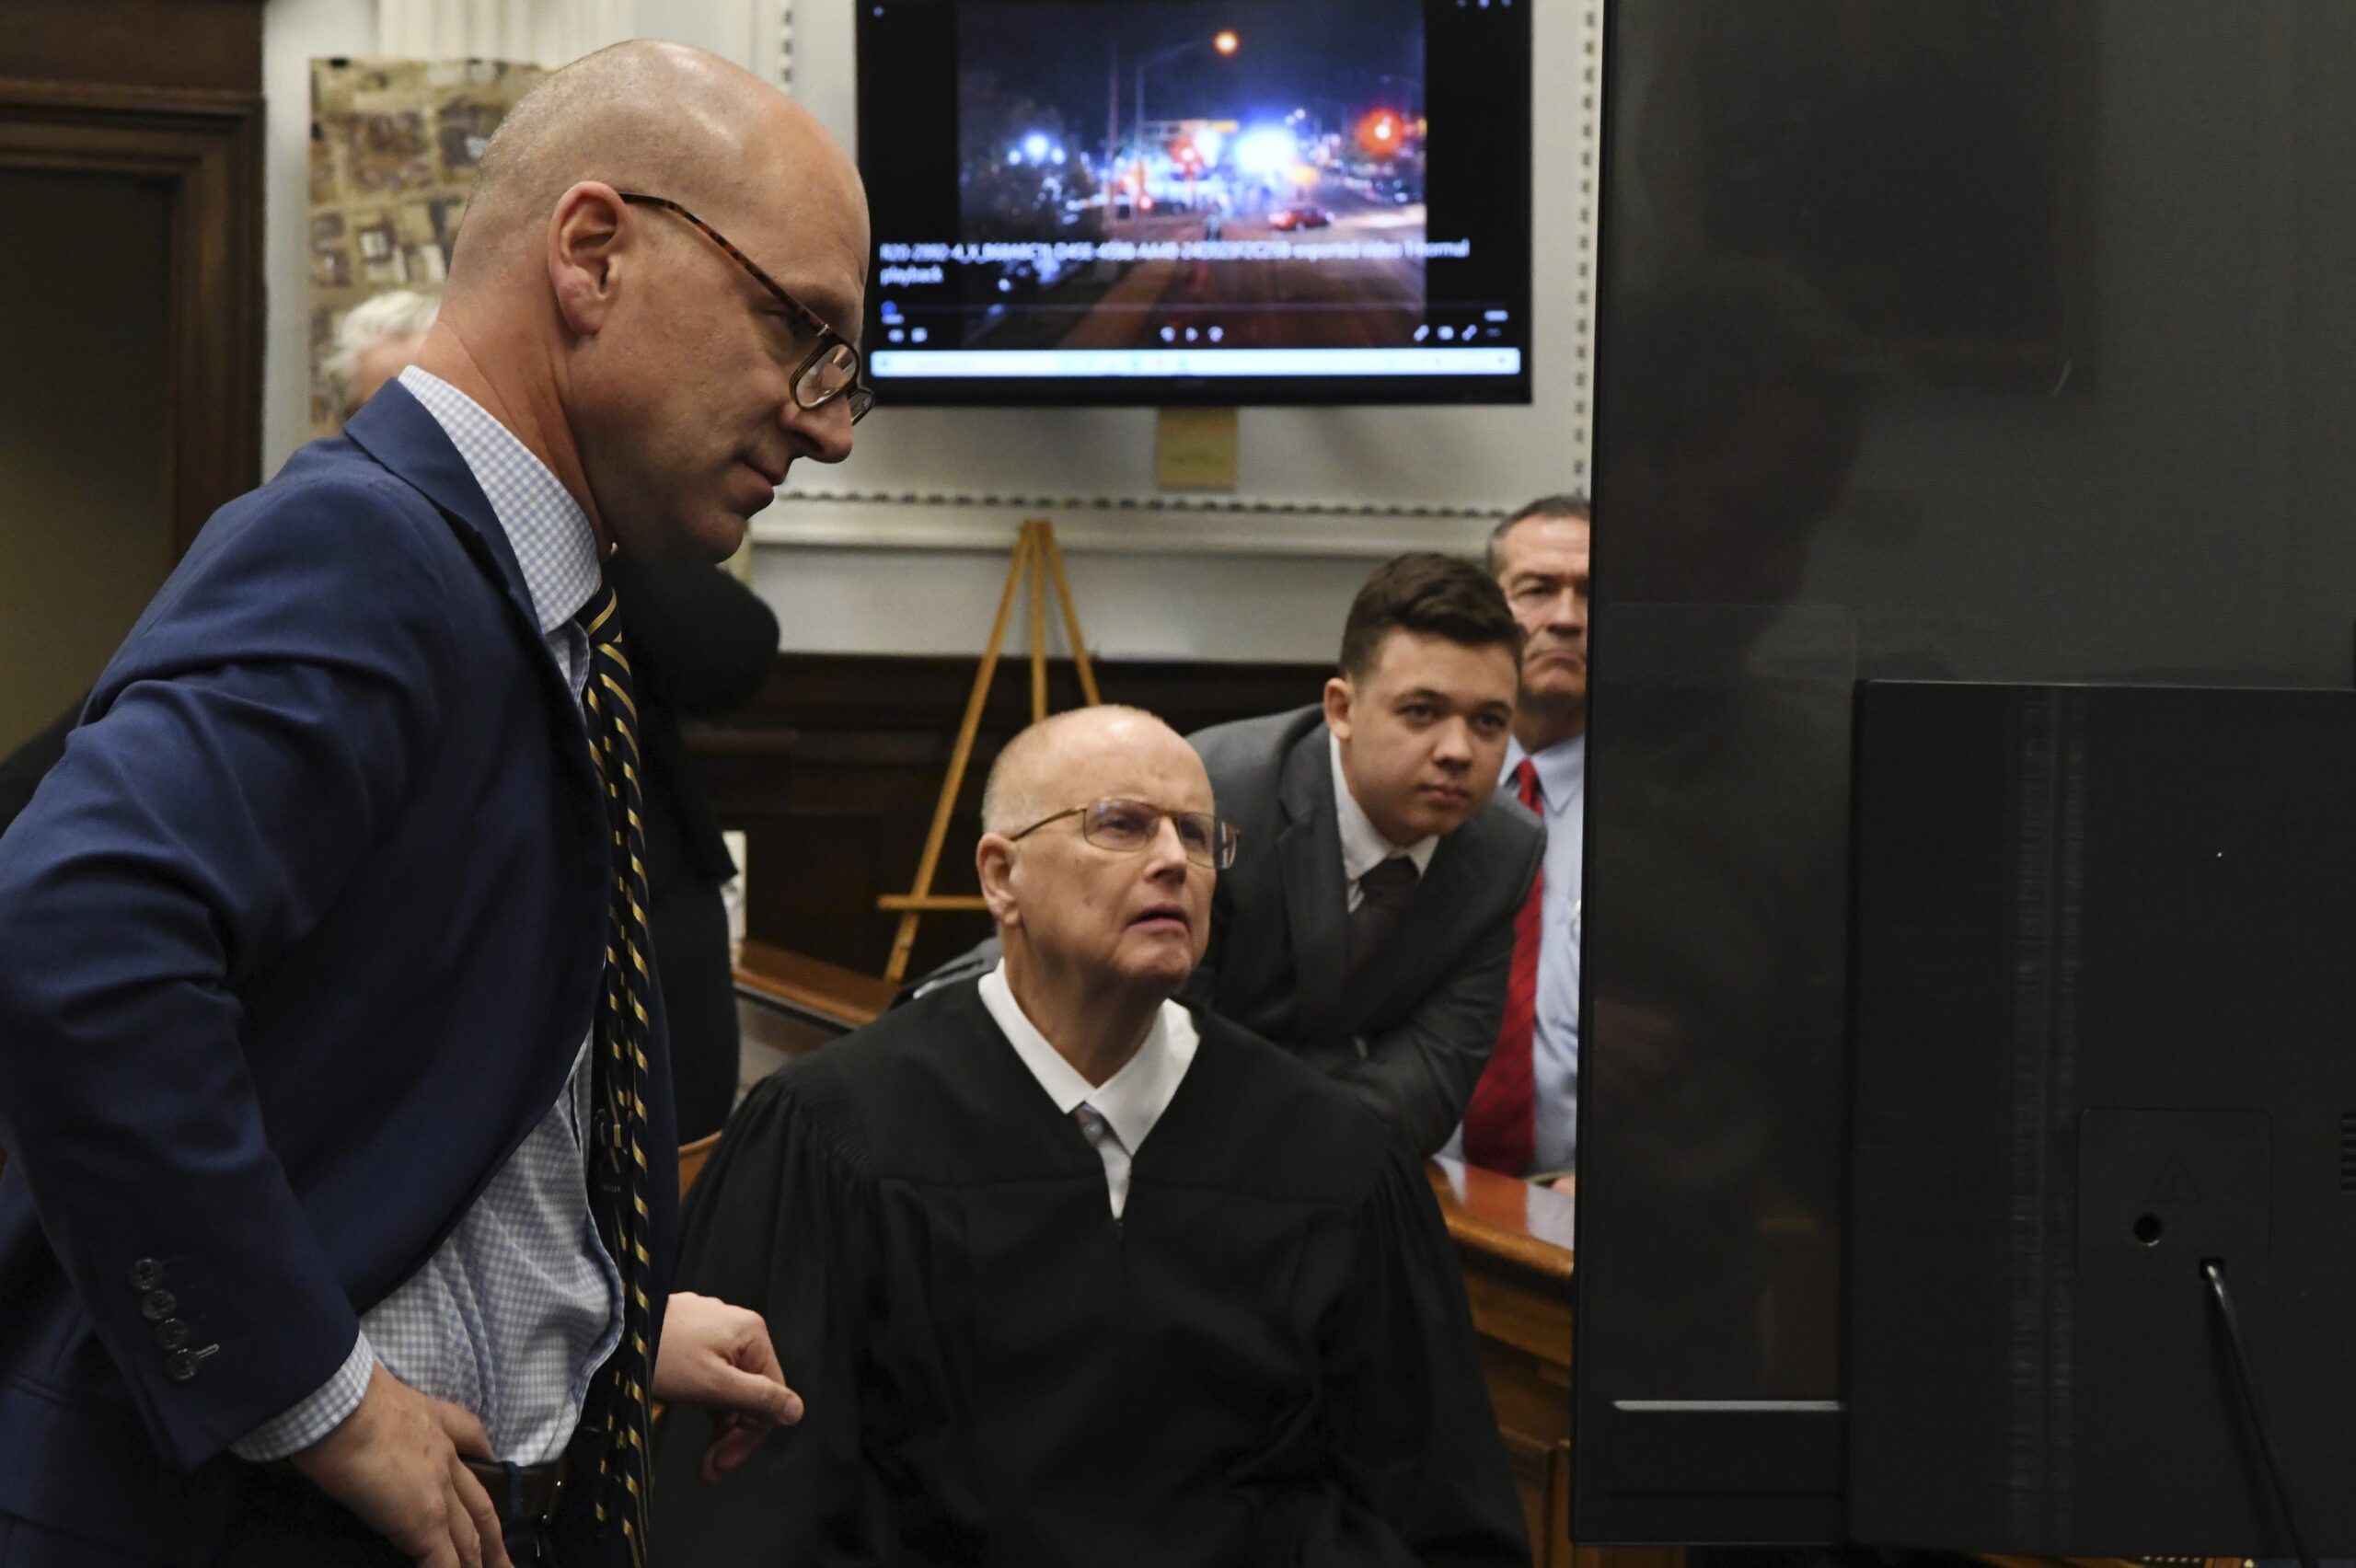 Defense attorney Corey Chirafisi, Judge Bruce Schroeder and Kyle Rittenhouse look at video screen